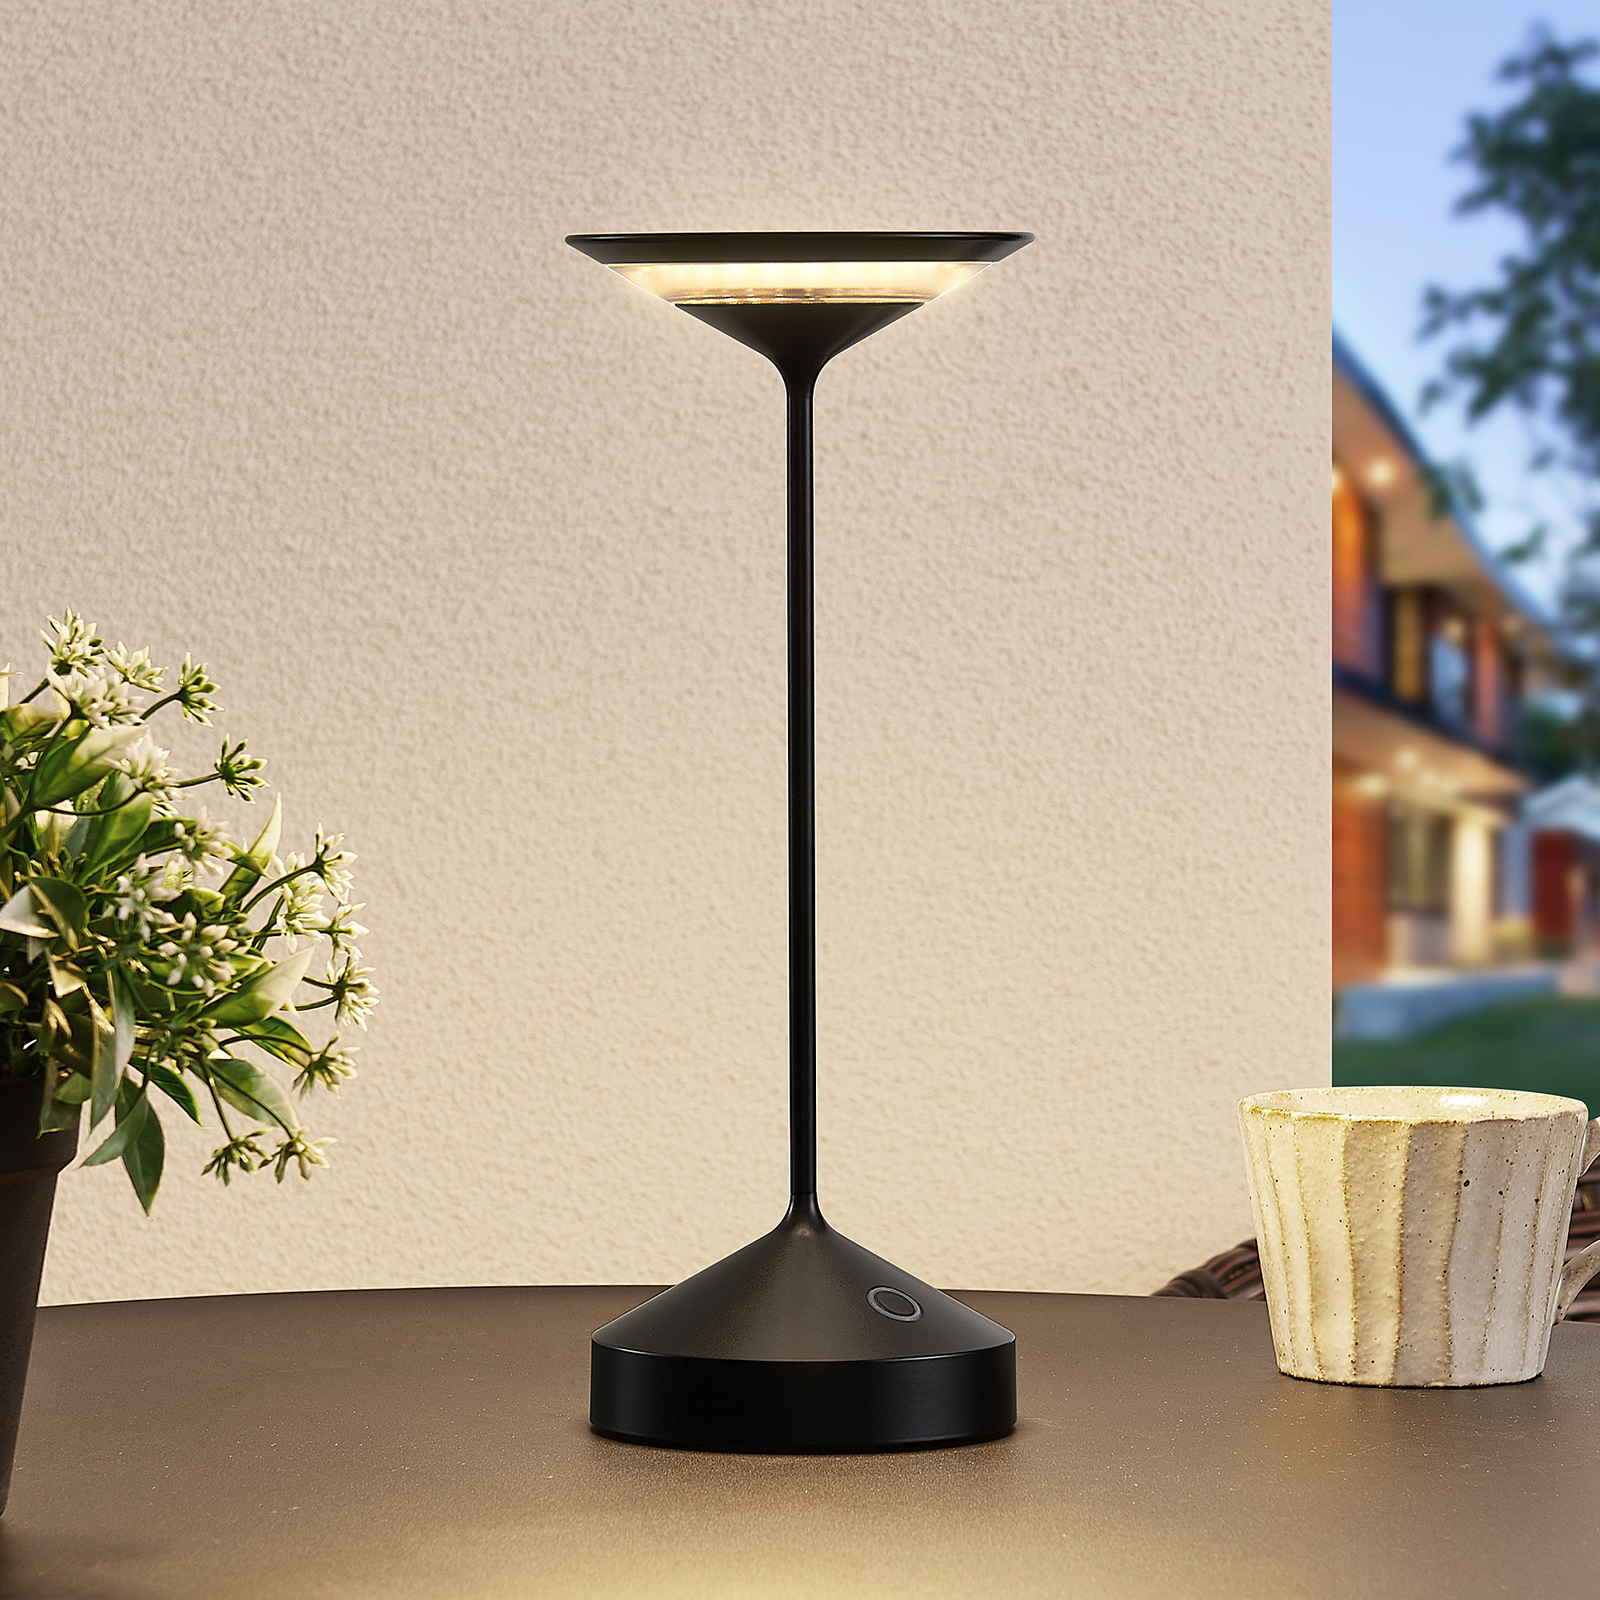 Lucande Raminum LED table lamp for outdoors, black